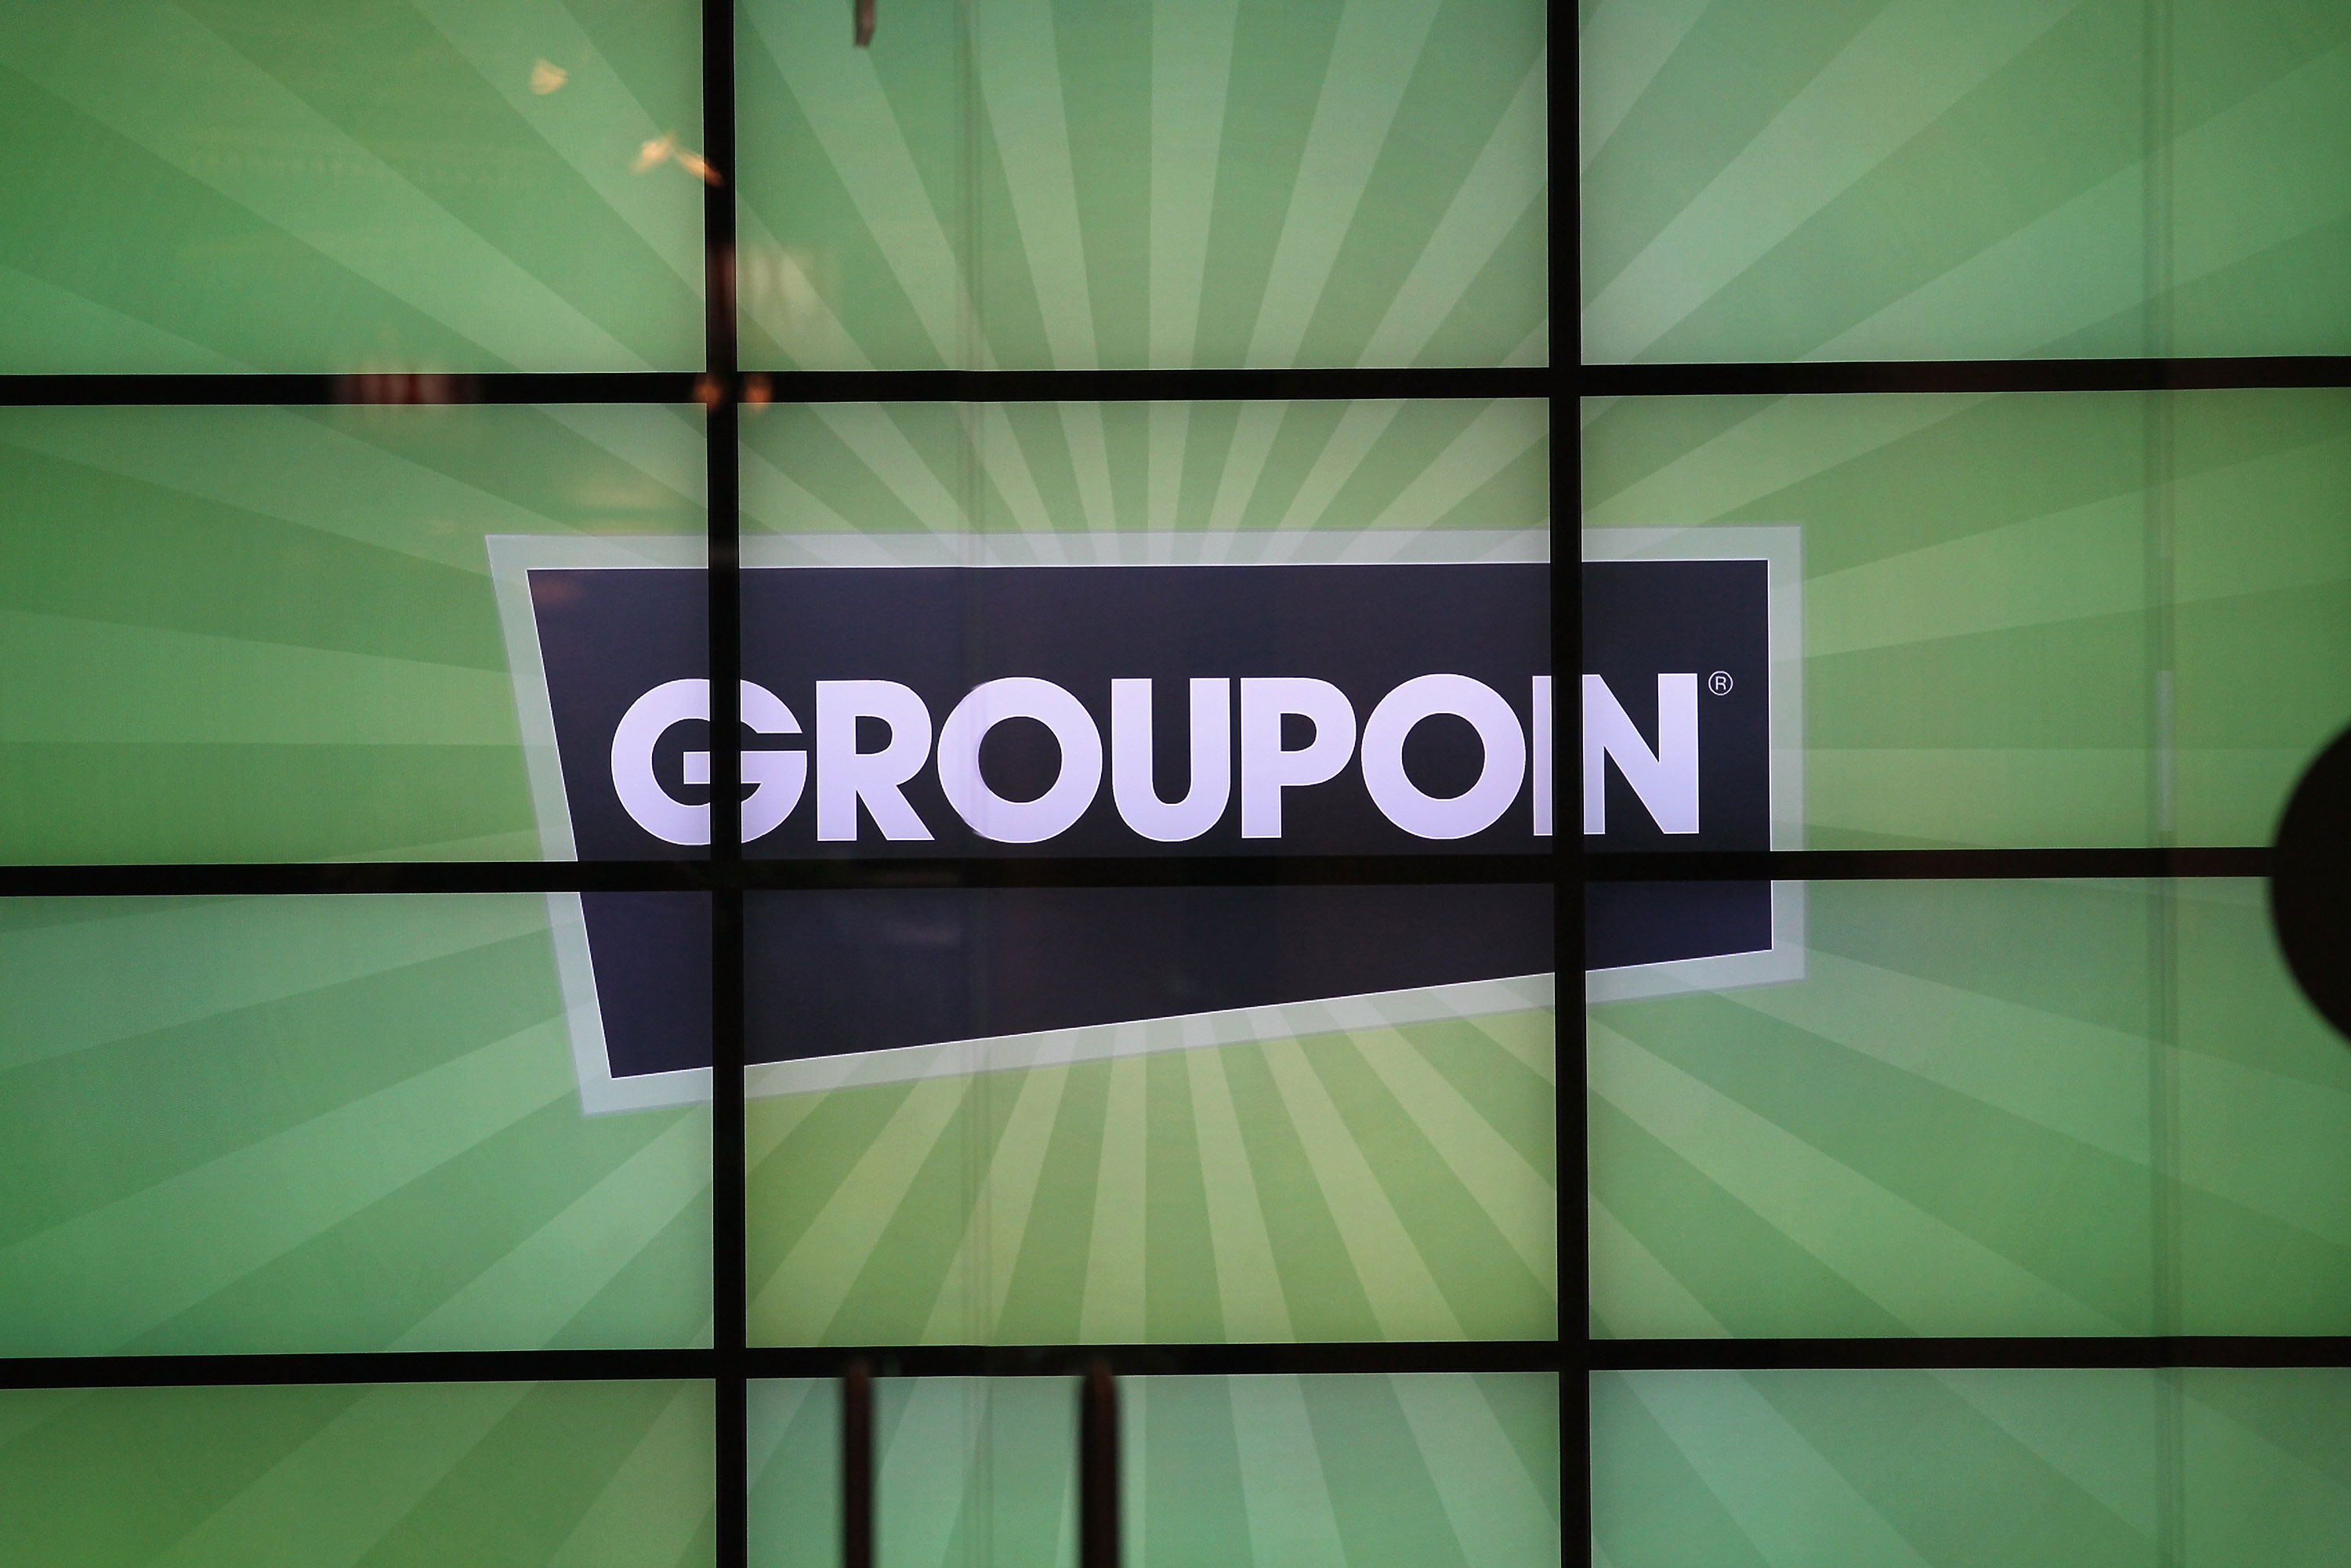 Groupon Is Laying Off 1,100 At A Cost Of $35M, Shutters Operations In 7  Countries | TechCrunch